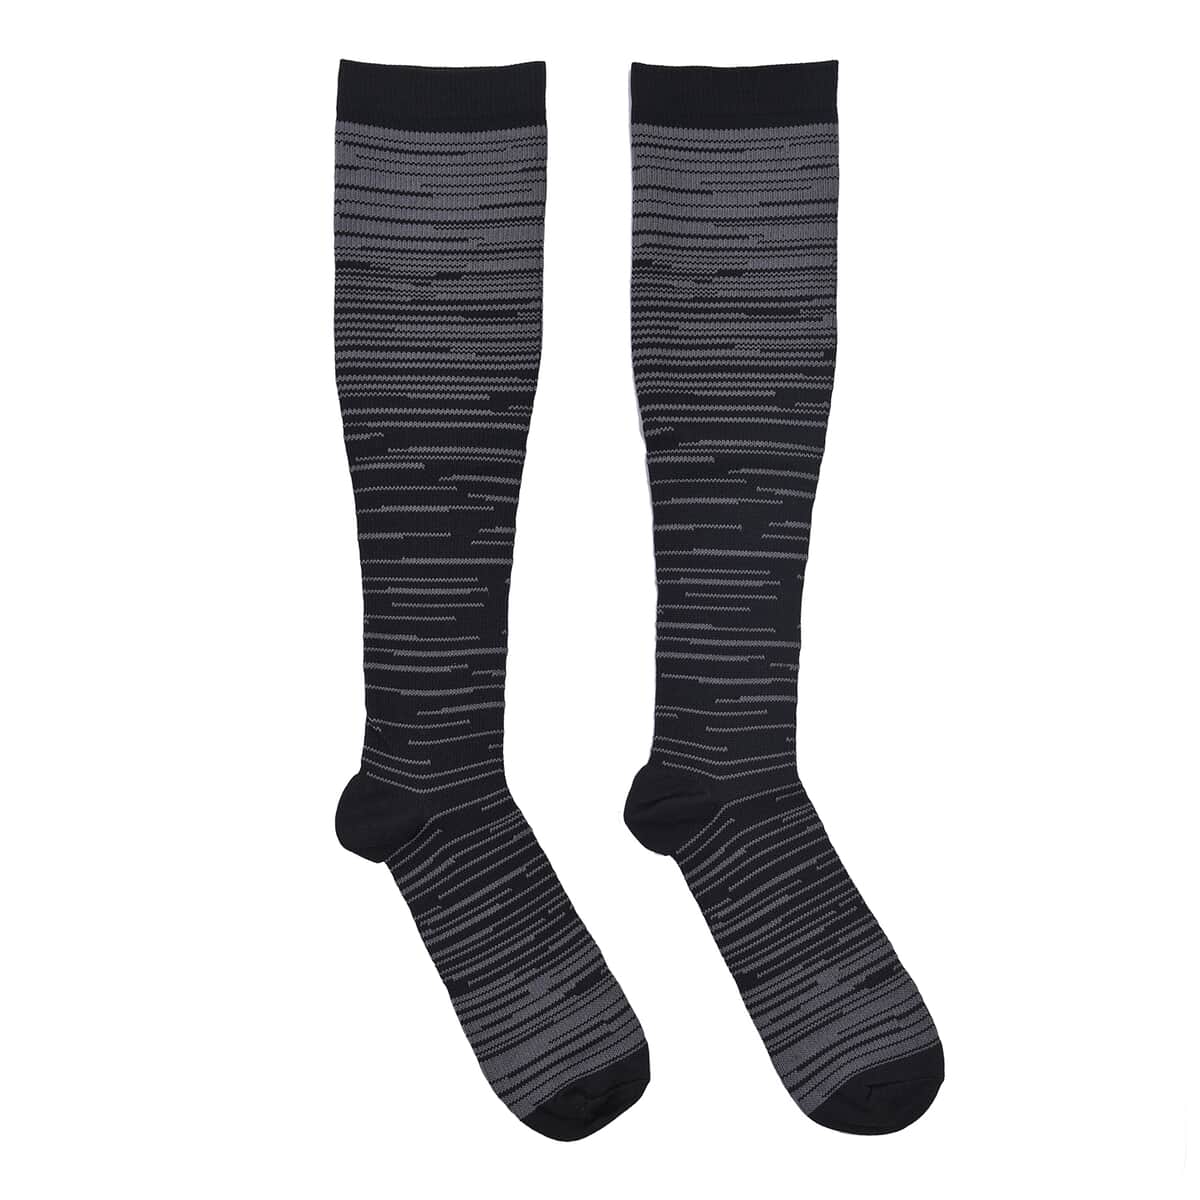 Set of 4 Pairs Knee Length Copper Infused Compression Socks - Multi Stripe (L/XL) image number 6